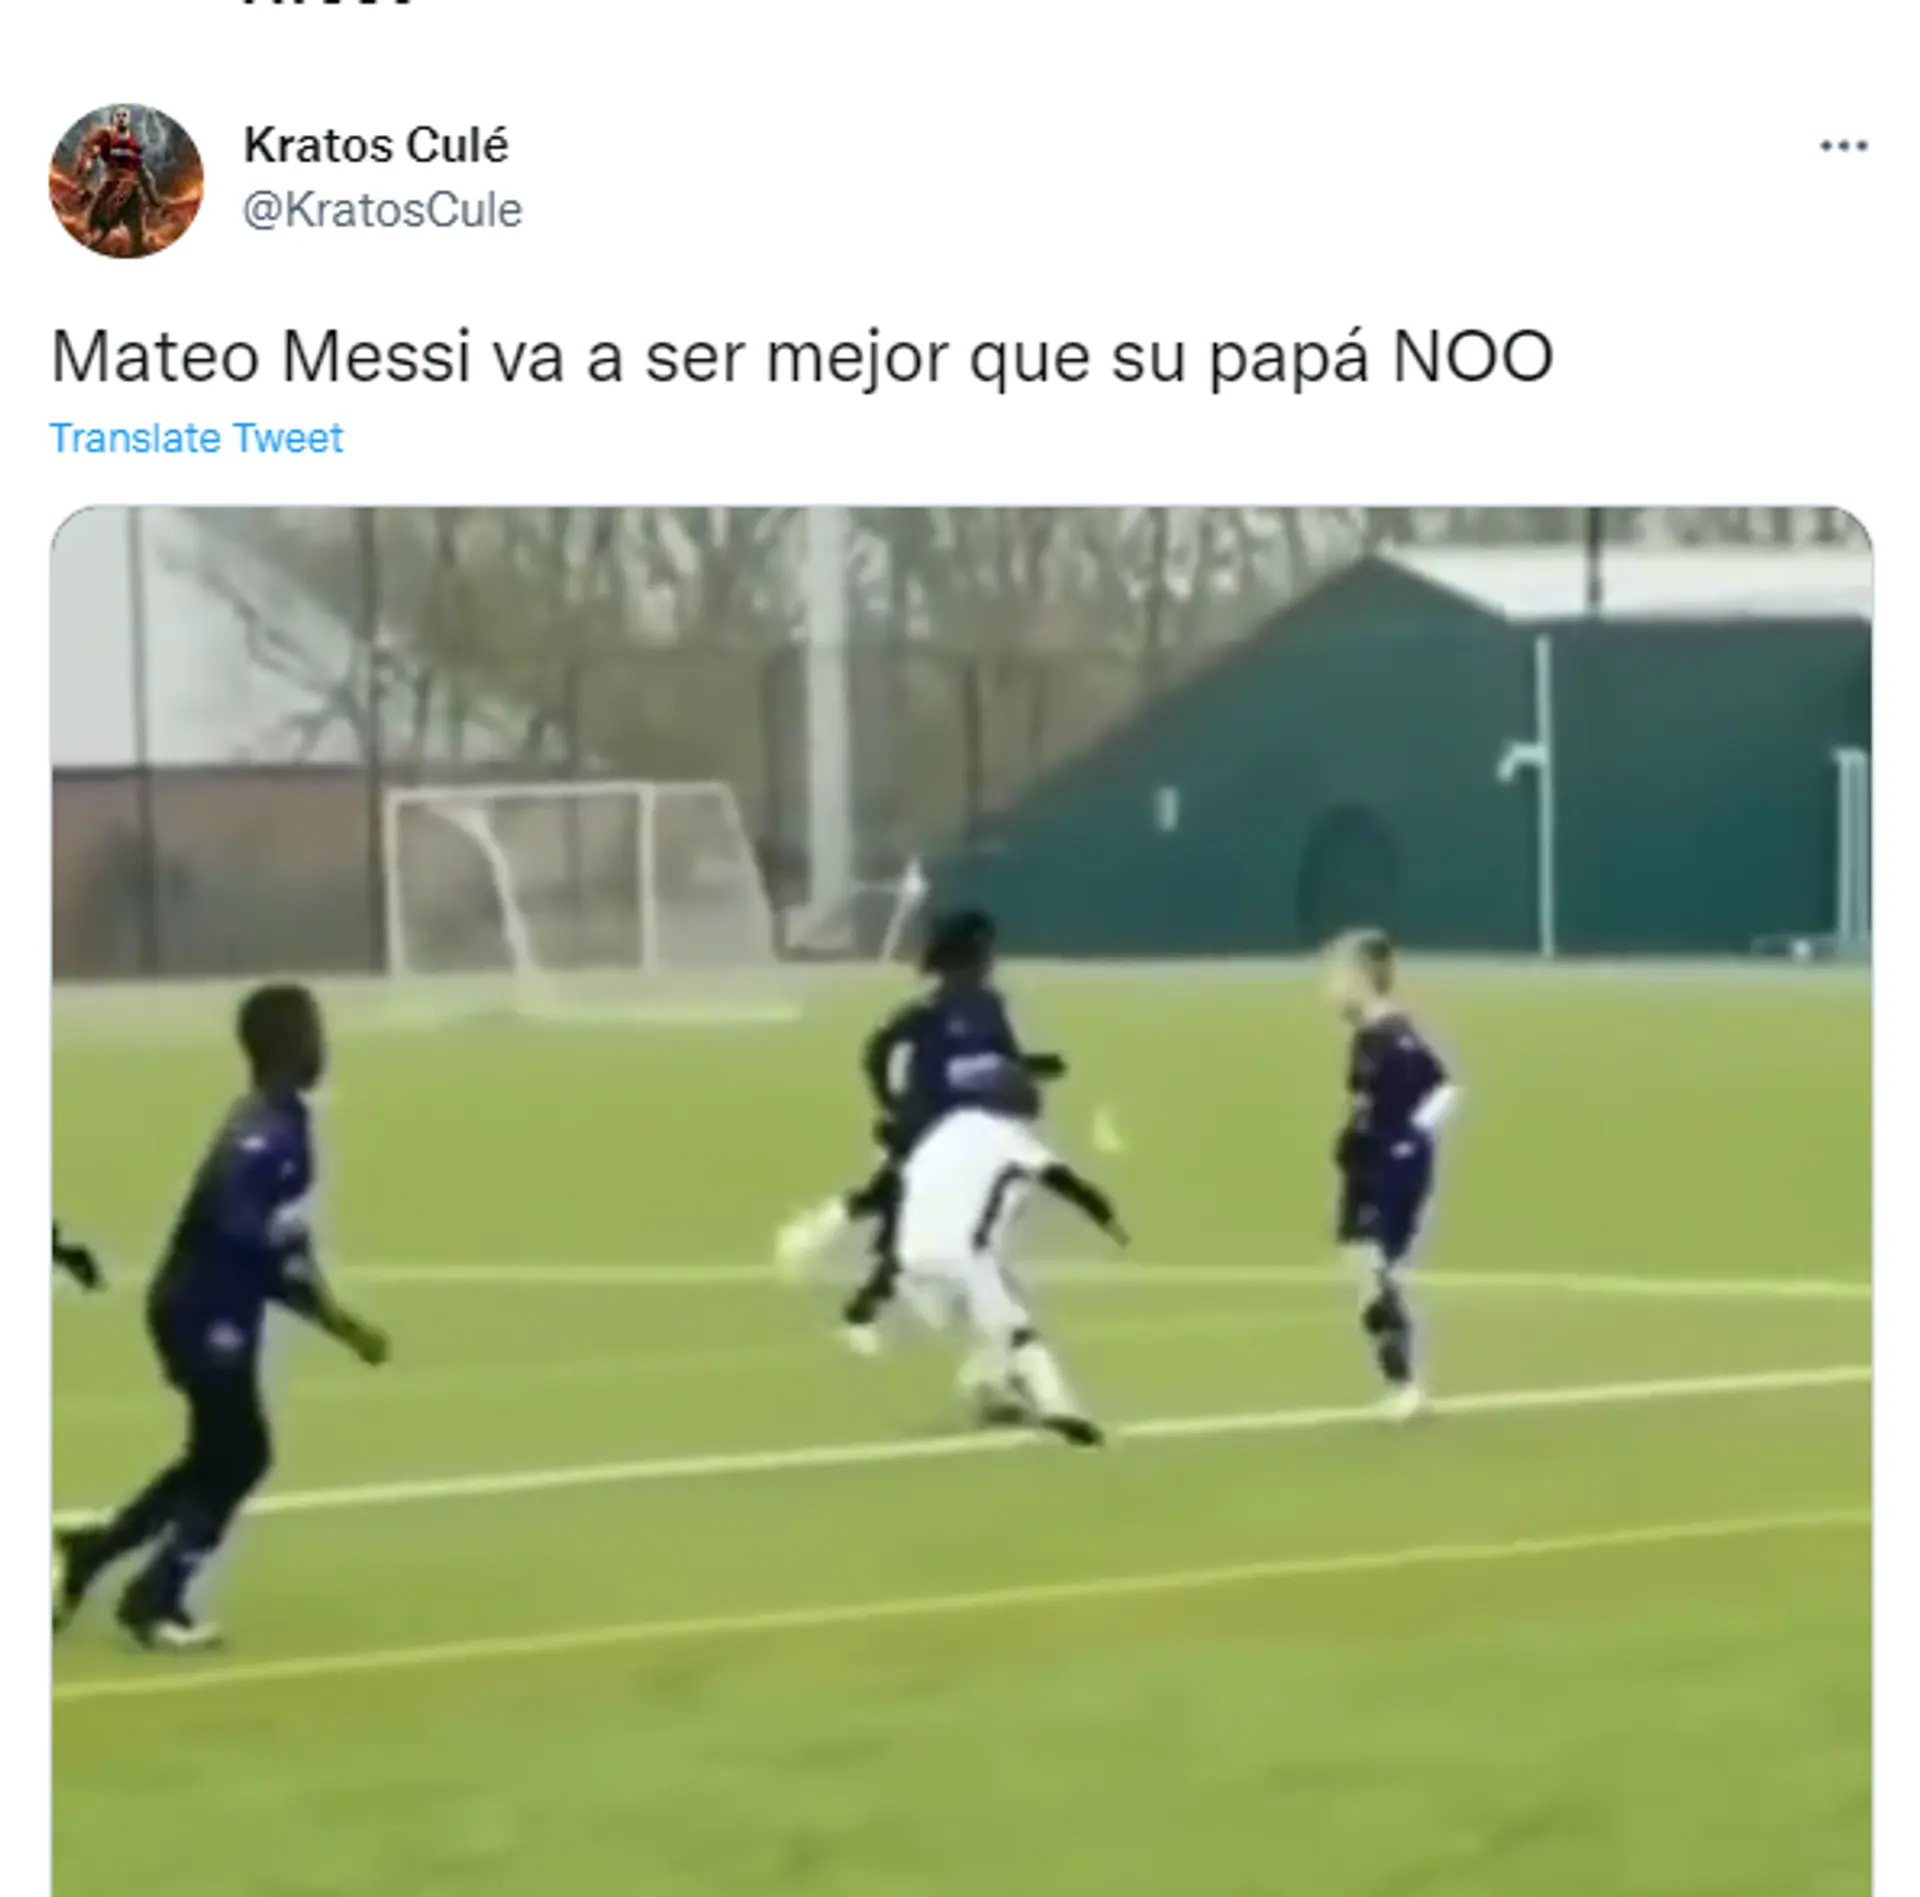 f3ce1fe2 f637 49fa b6f2 94f5783916eb?width=1920&quality=75 Kid wrongly identified as Mateo Messi goes viral among Barca fans with solo golazo